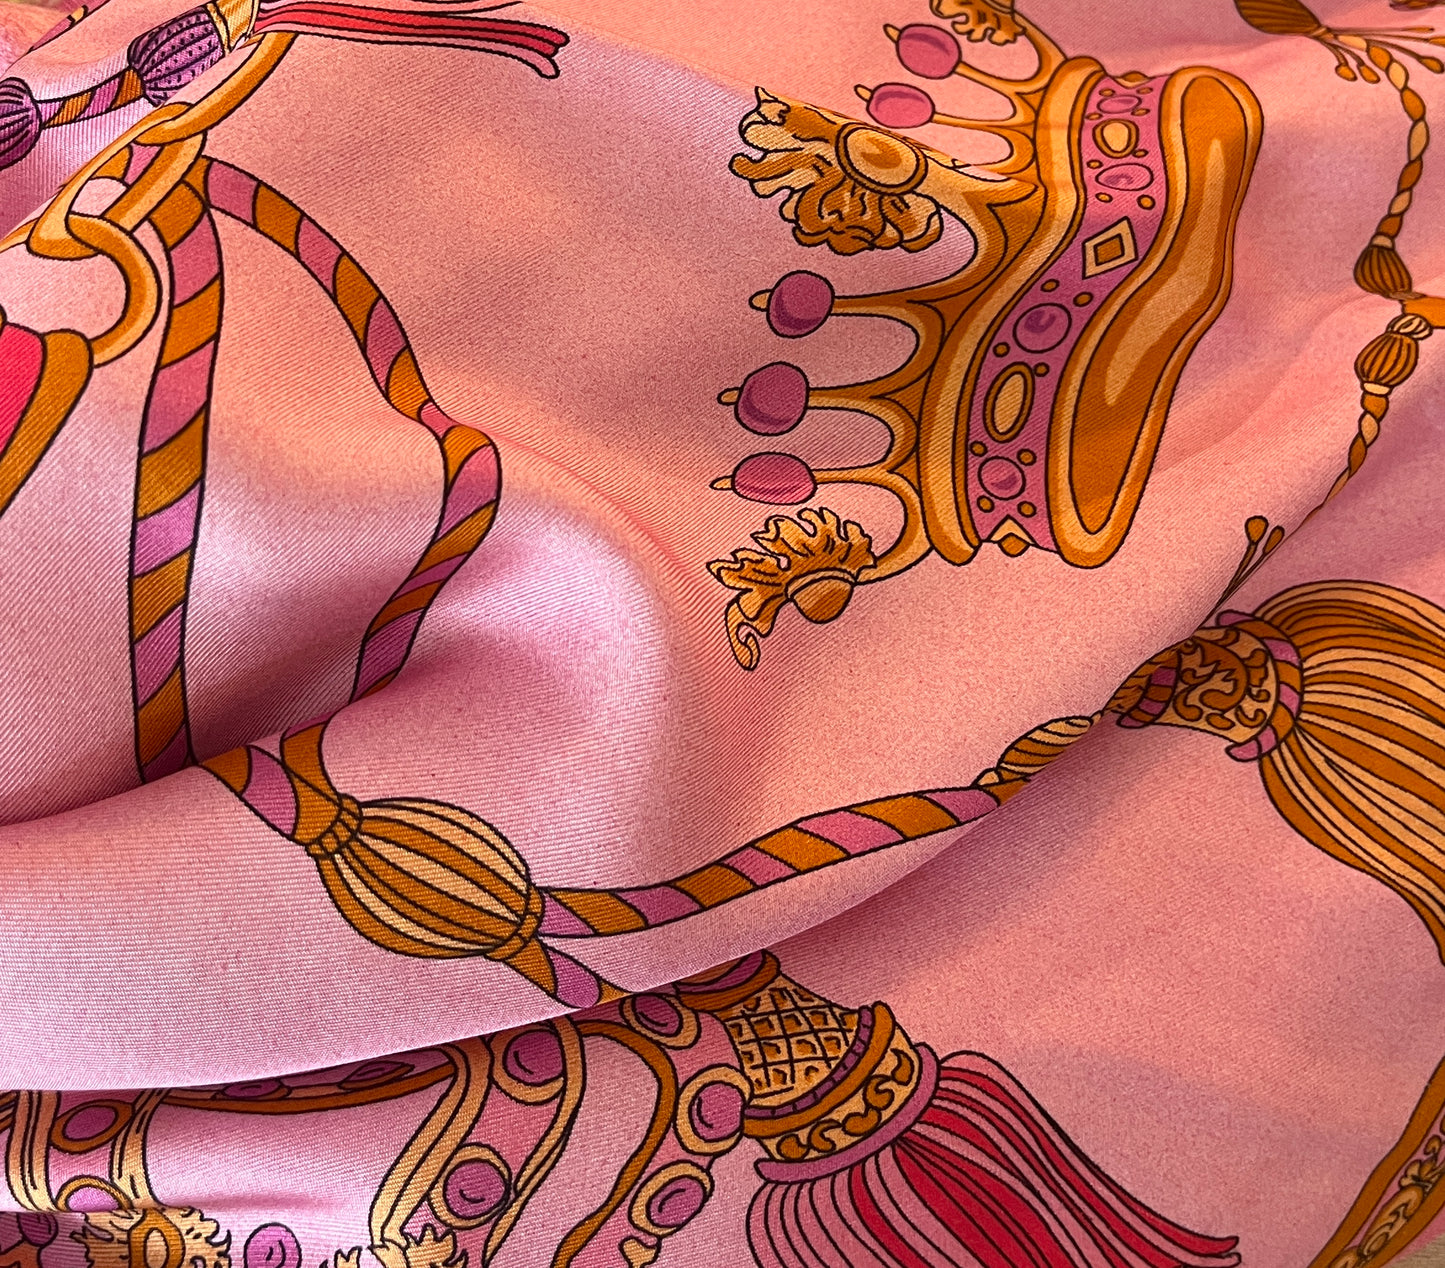 Avant Toi - Foulard Scarf in English Rose or Clematis